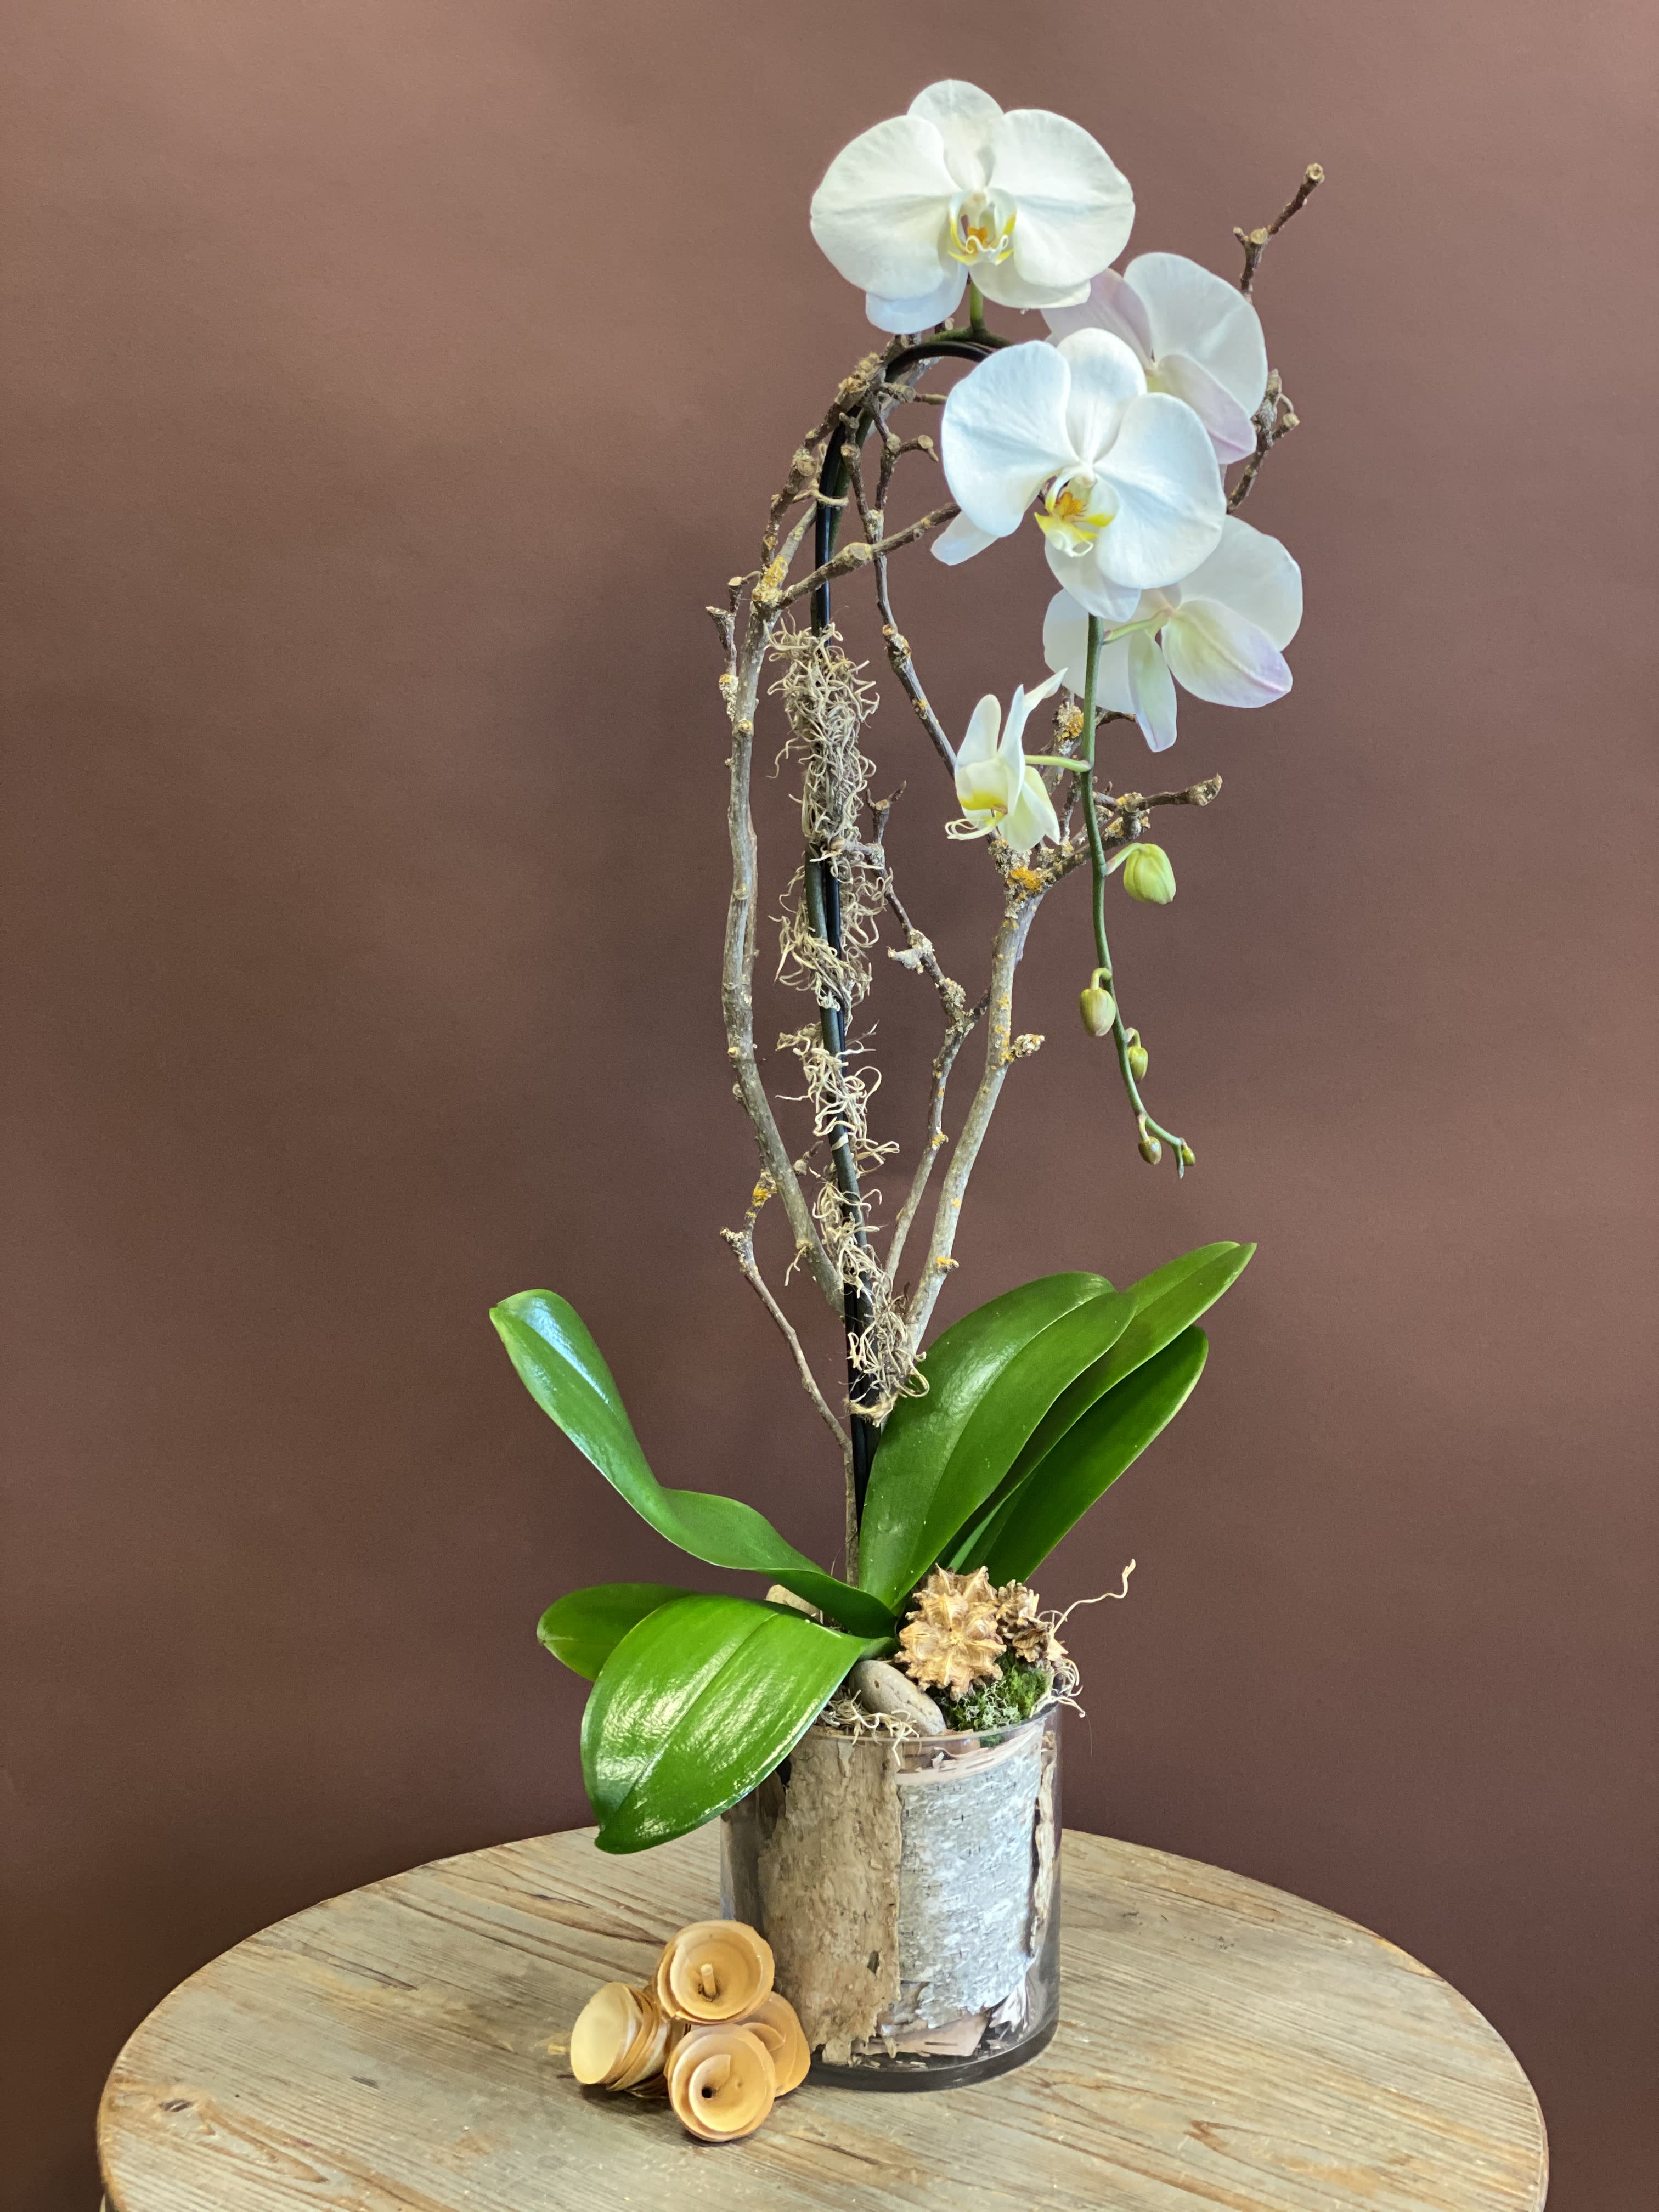 Earthy - Embrace the organic beauty of our Earthy arrangement. With Phalaenopsis Orchids and Architectural Dried Botanicals displayed in a minimalistic birch cylinder, the beauty of this piece speaks for itself.